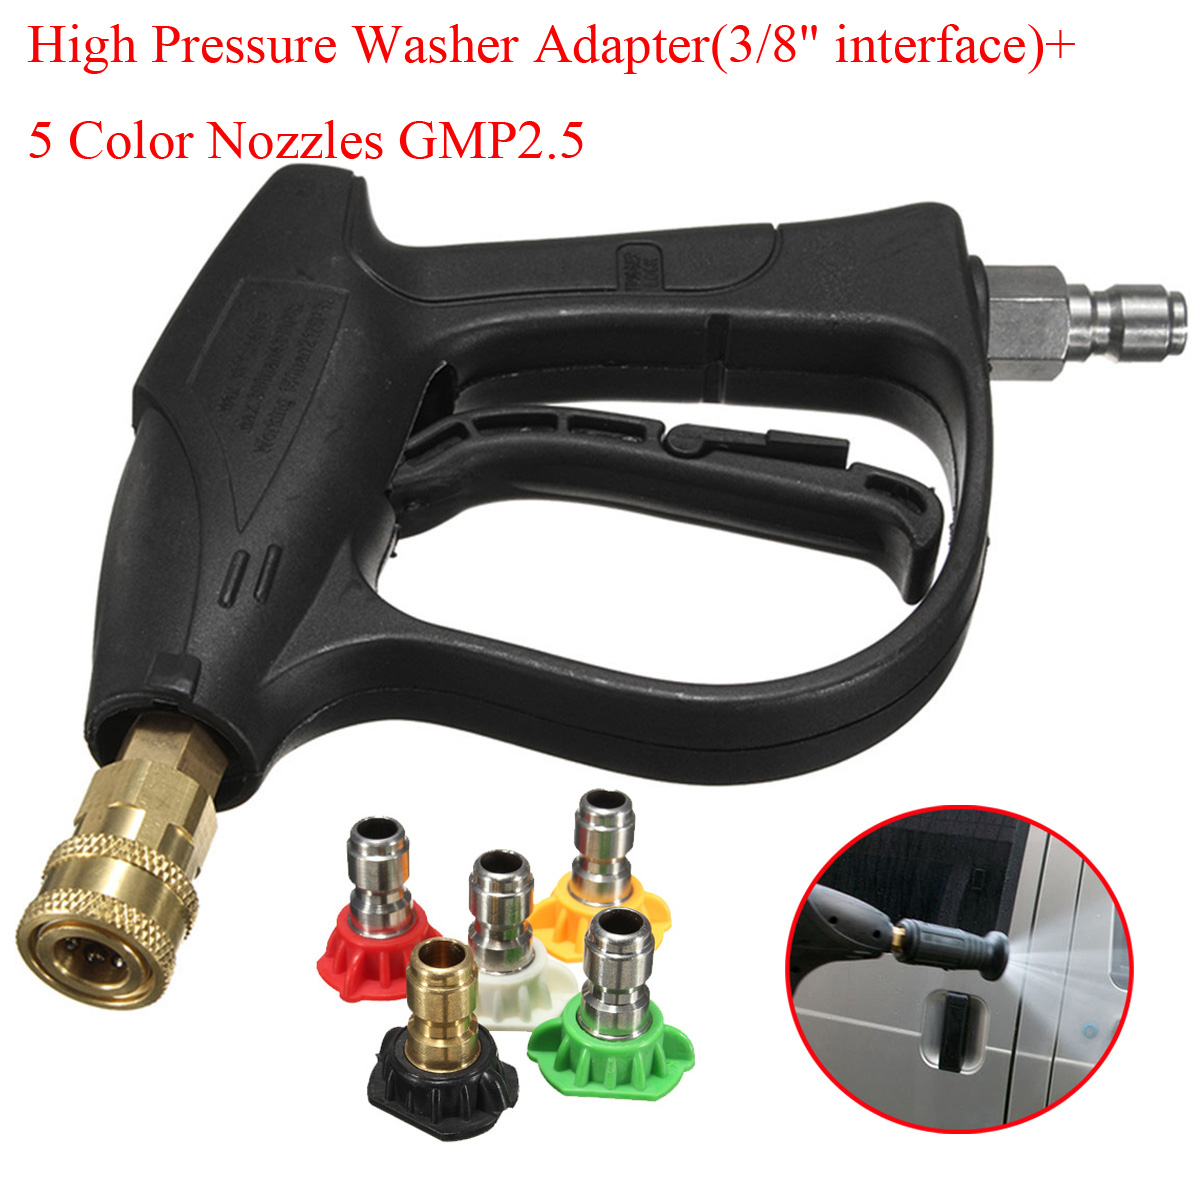 3000PSI-High-Pressure-Water-Gun-Adapter-With-5pcs-Nozzles-for-High-Pressure-Water-Cleaner-1130889-10